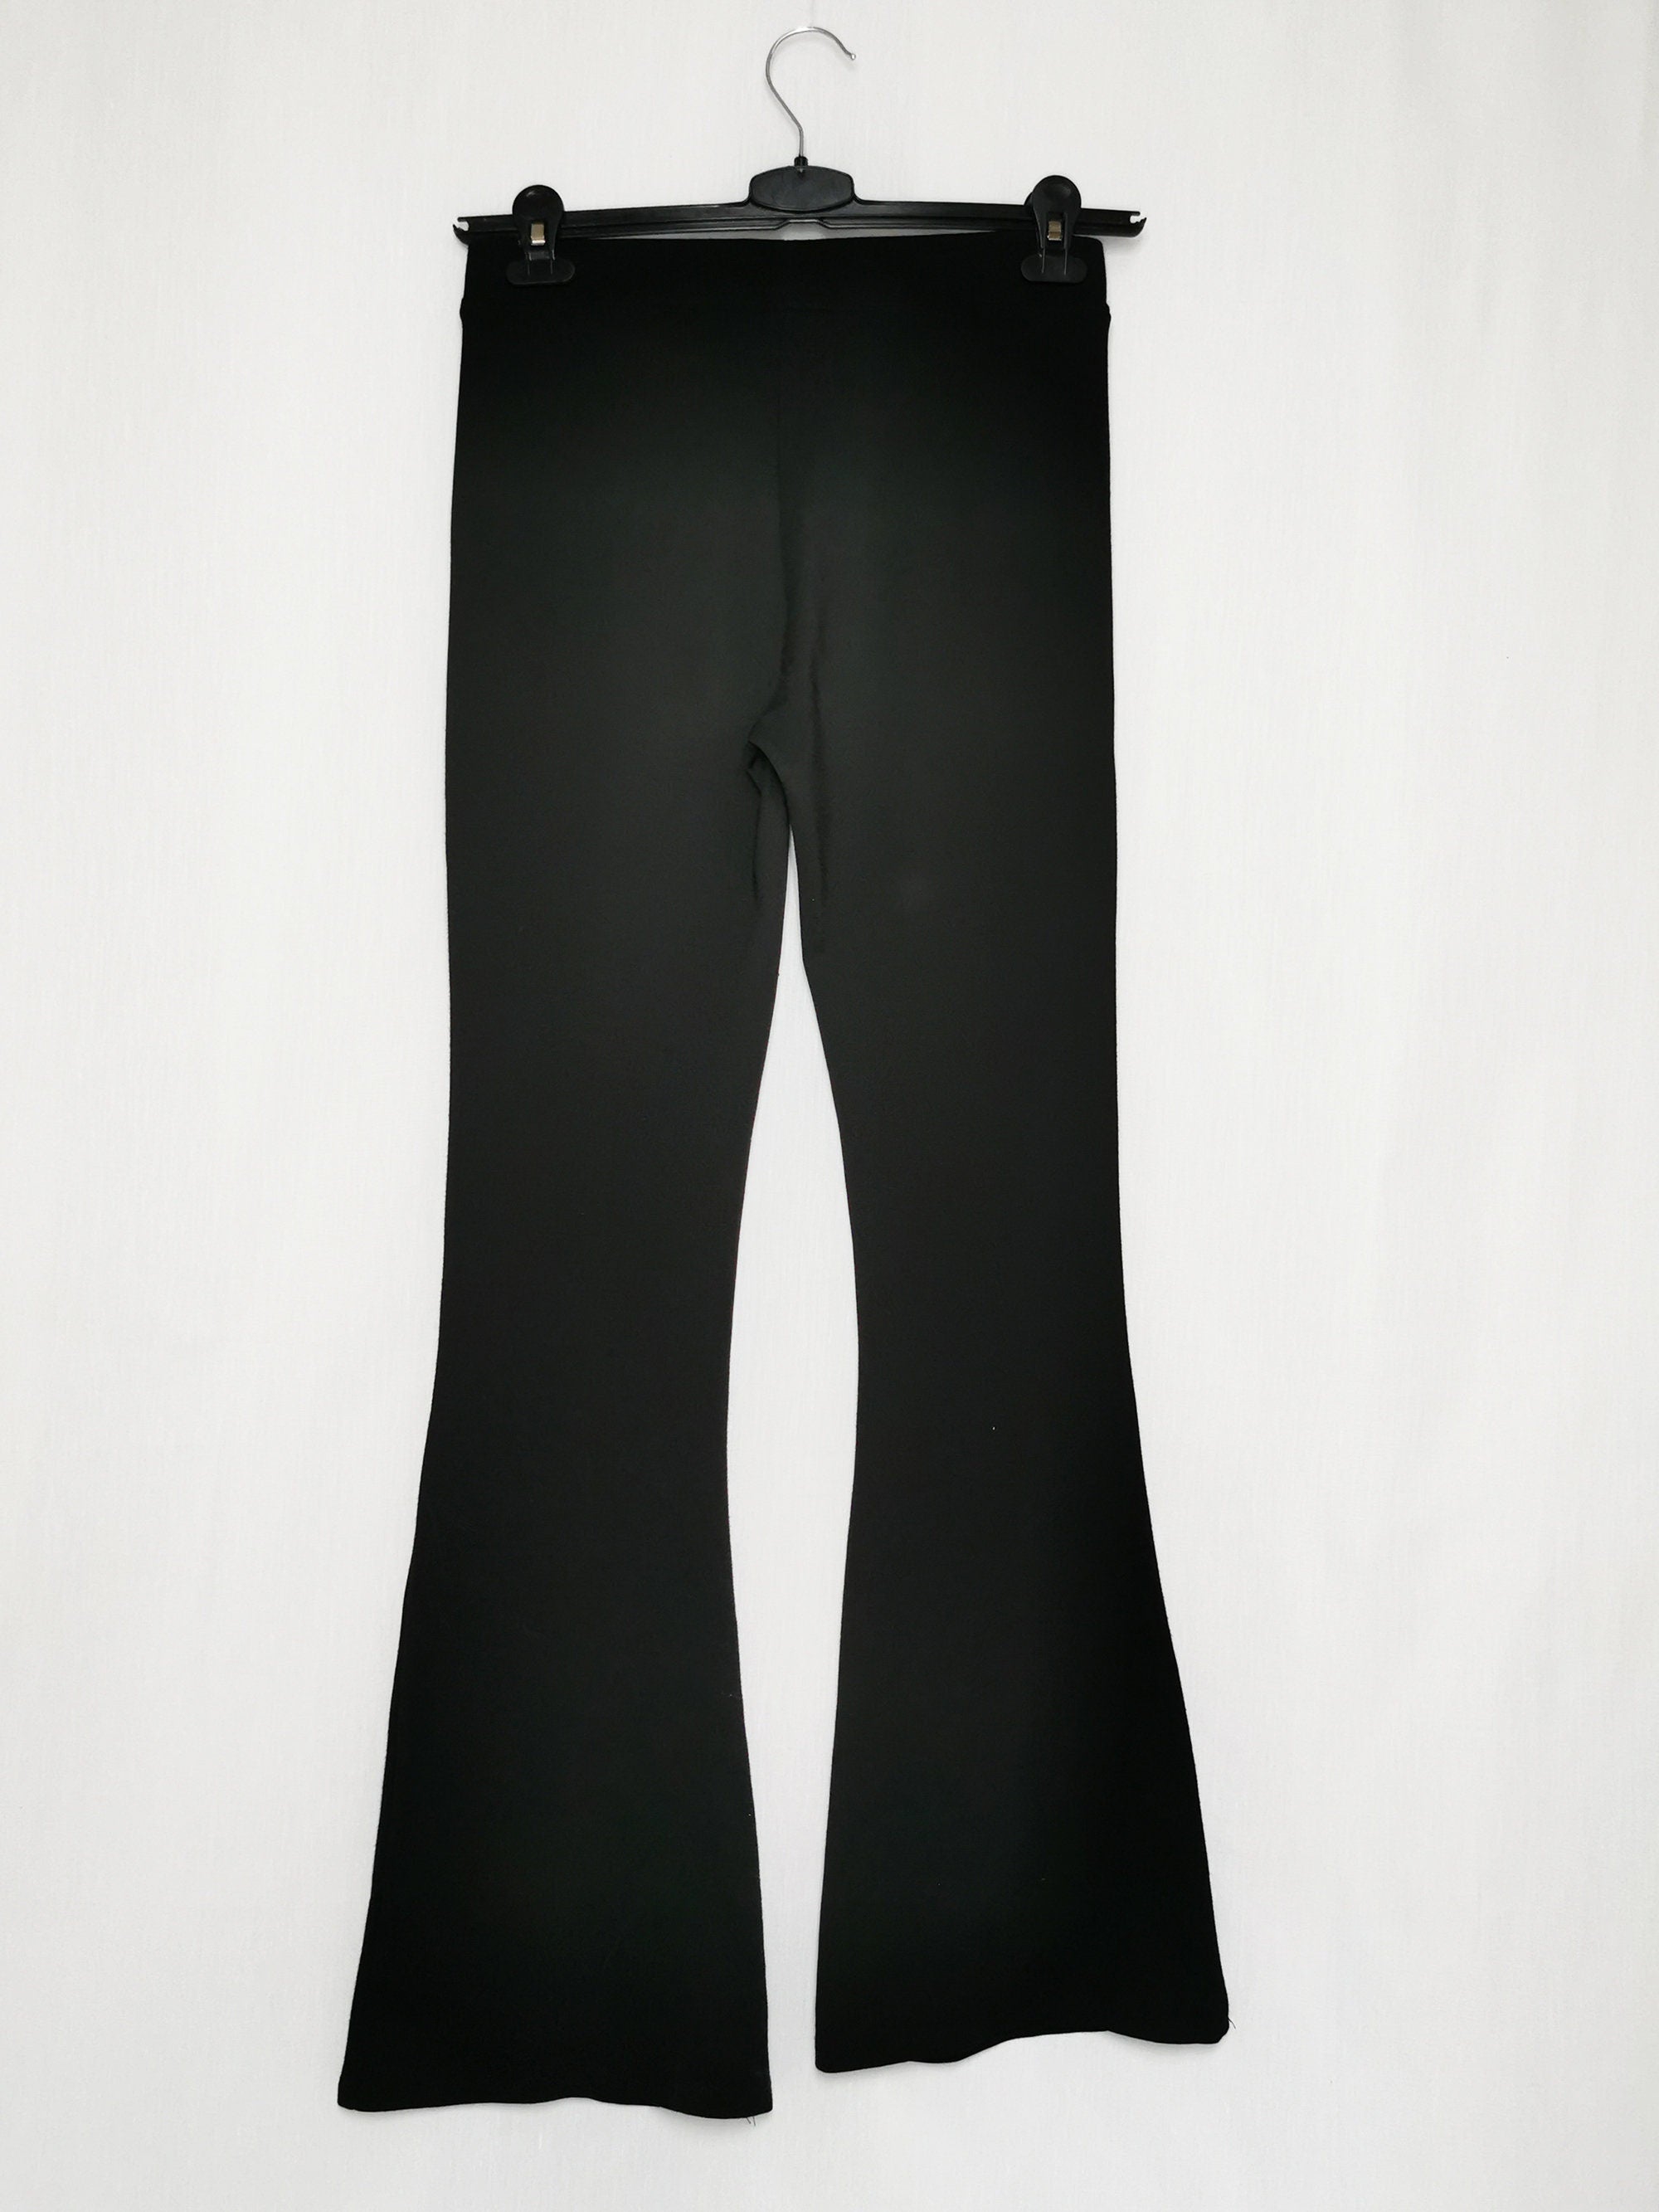 Vintage 90s black jersey casual stretch flare pants